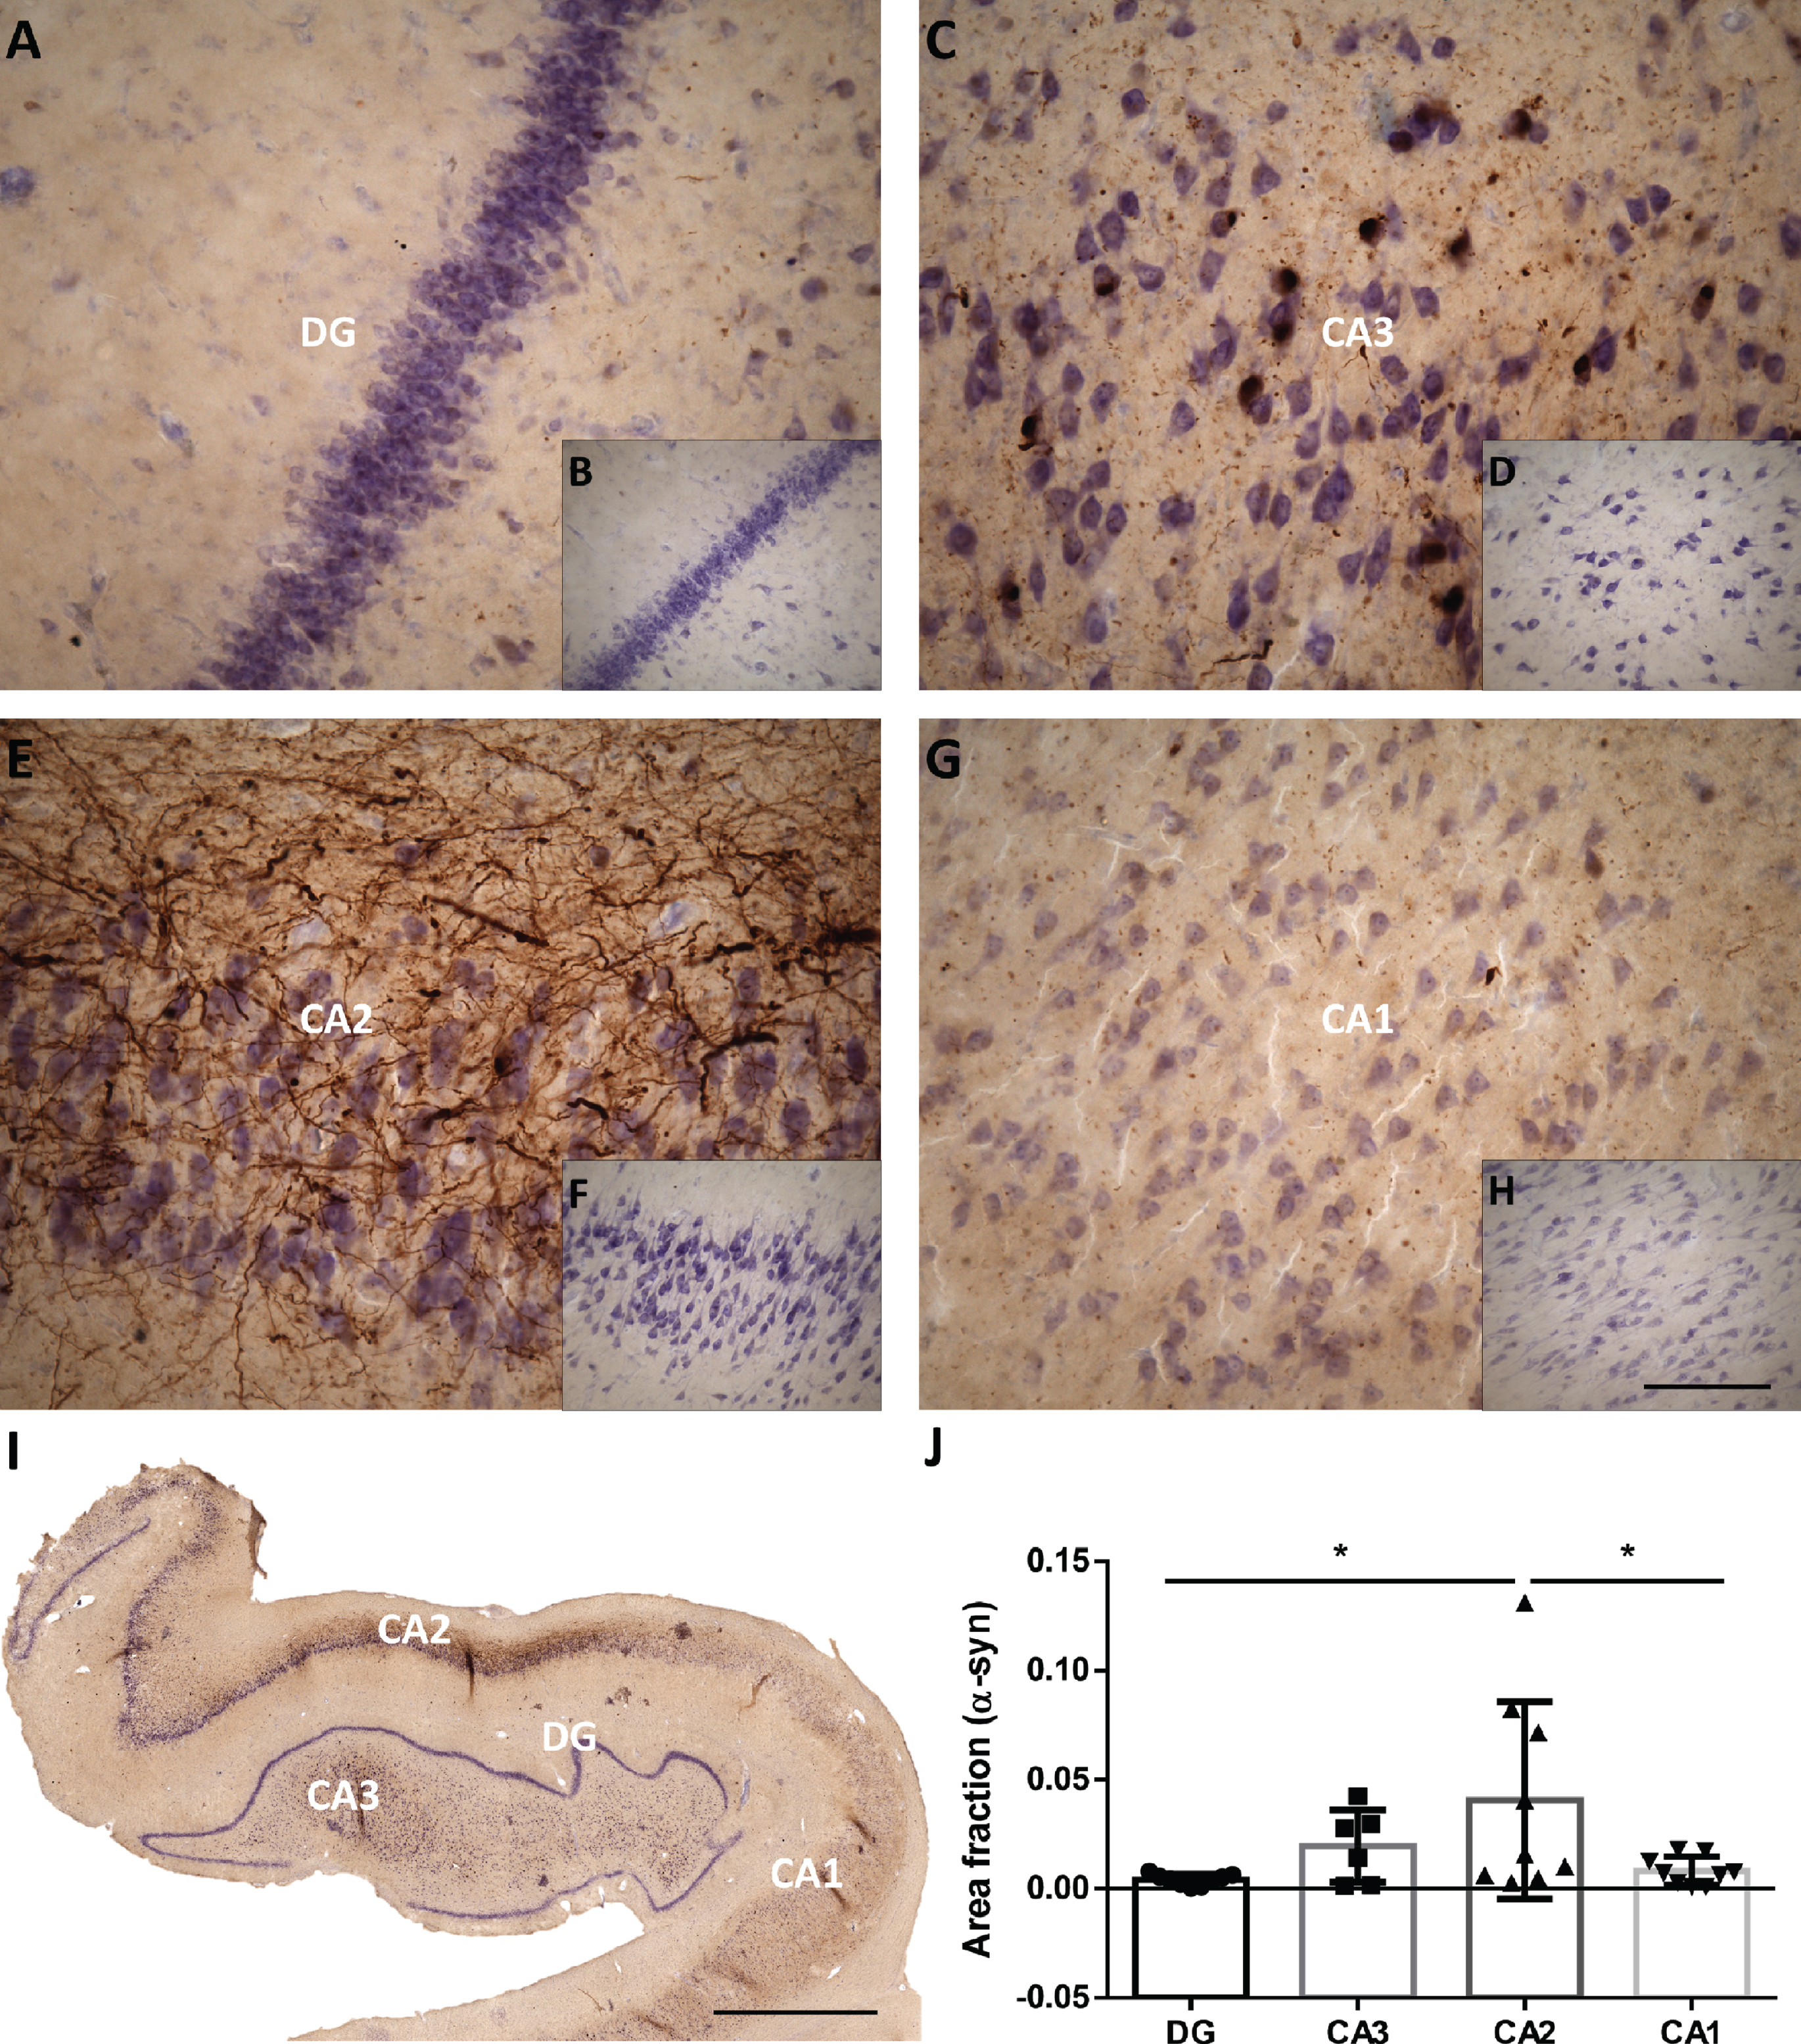 Mosaic reconstruction (I) and picture of the DG, CA3, CA2 and CA1 of the human hippocampus with PD (A, C, E, G respectively) and without PD (B, D, F, G respectively) immunohistochemistry stained for α-synuclein. The mean±SD of the area fraction occupied by α-synuclein in the different regions of the hippocampus in the total hippocampus of PD cases (J). Scale bars 90μm (A, C, E, G), 250μm (B, D, F, H) and 2000μm (I).